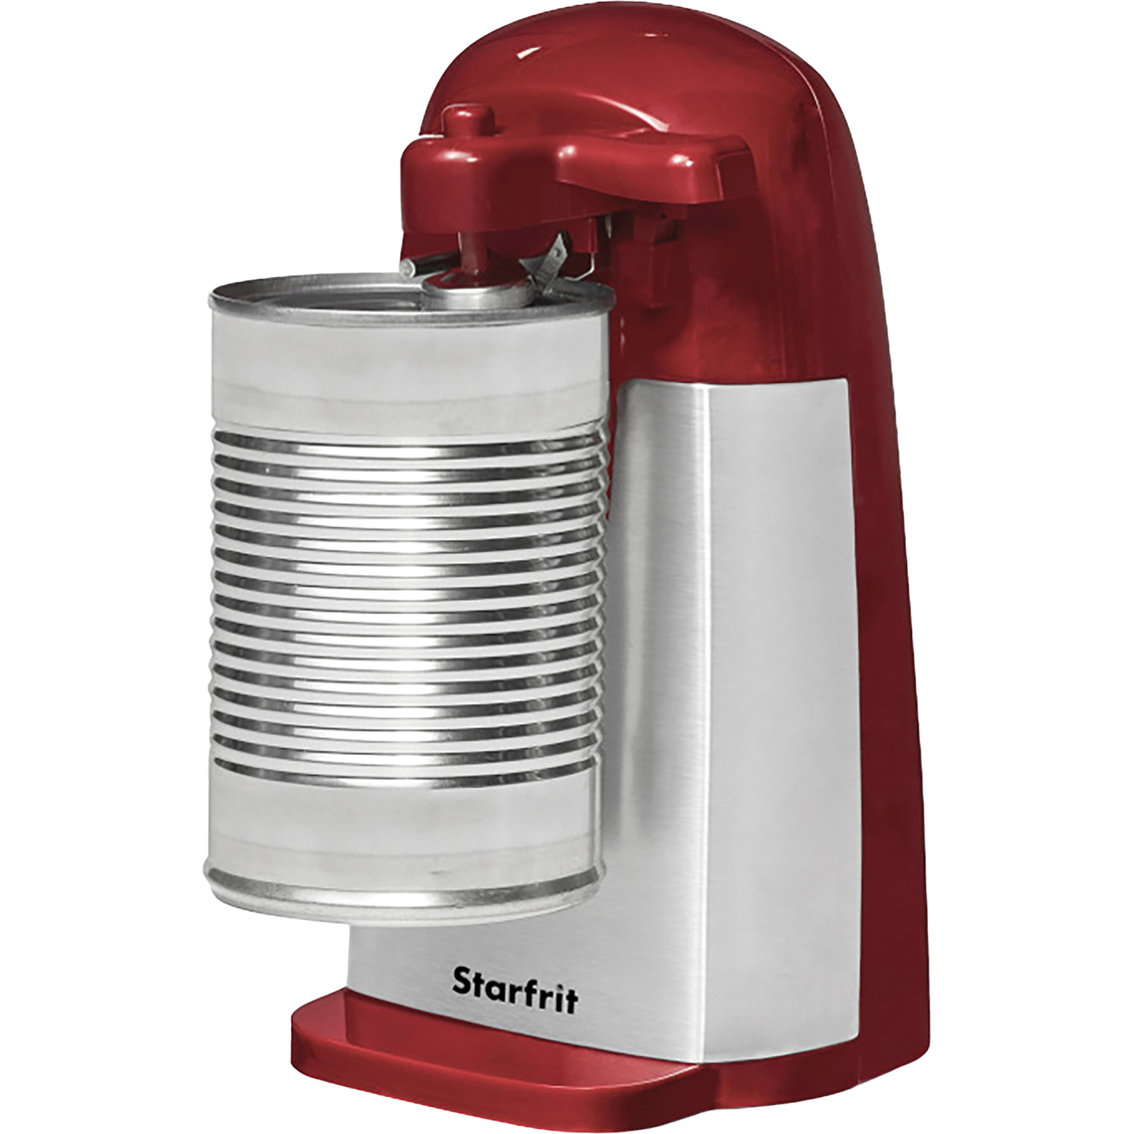 Starfrit 50W 3 in 1 Electric Can Opener - Image 2 of 7